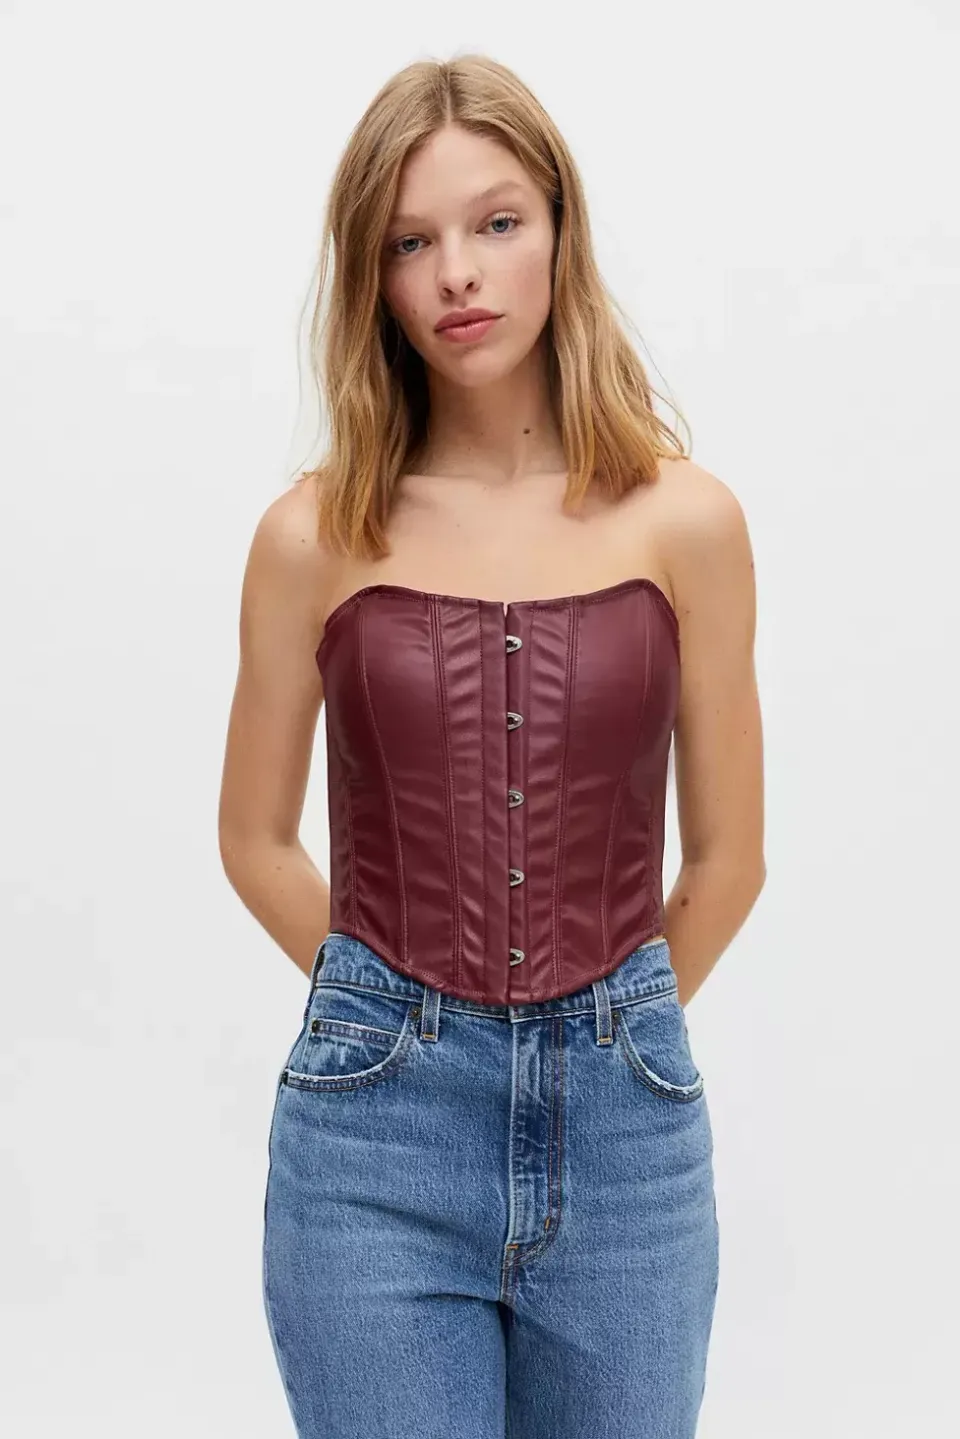 Shop The Trend: Corset And Bustier Tops You Can Actually Breathe